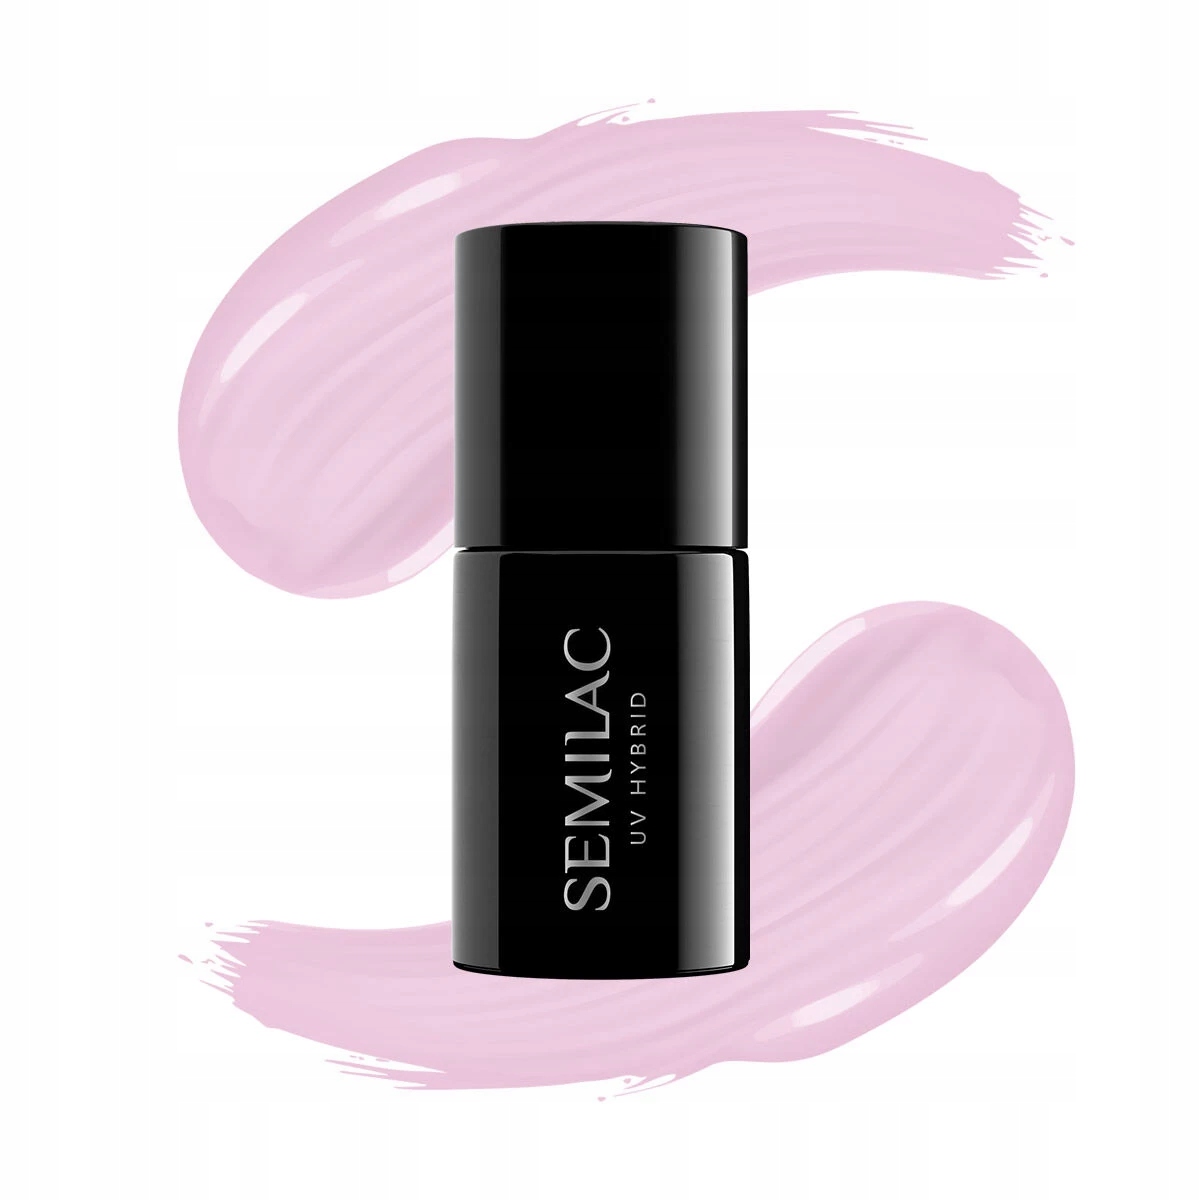 Semilac Extend 5v1 Delicate Pink 803 - 7ml